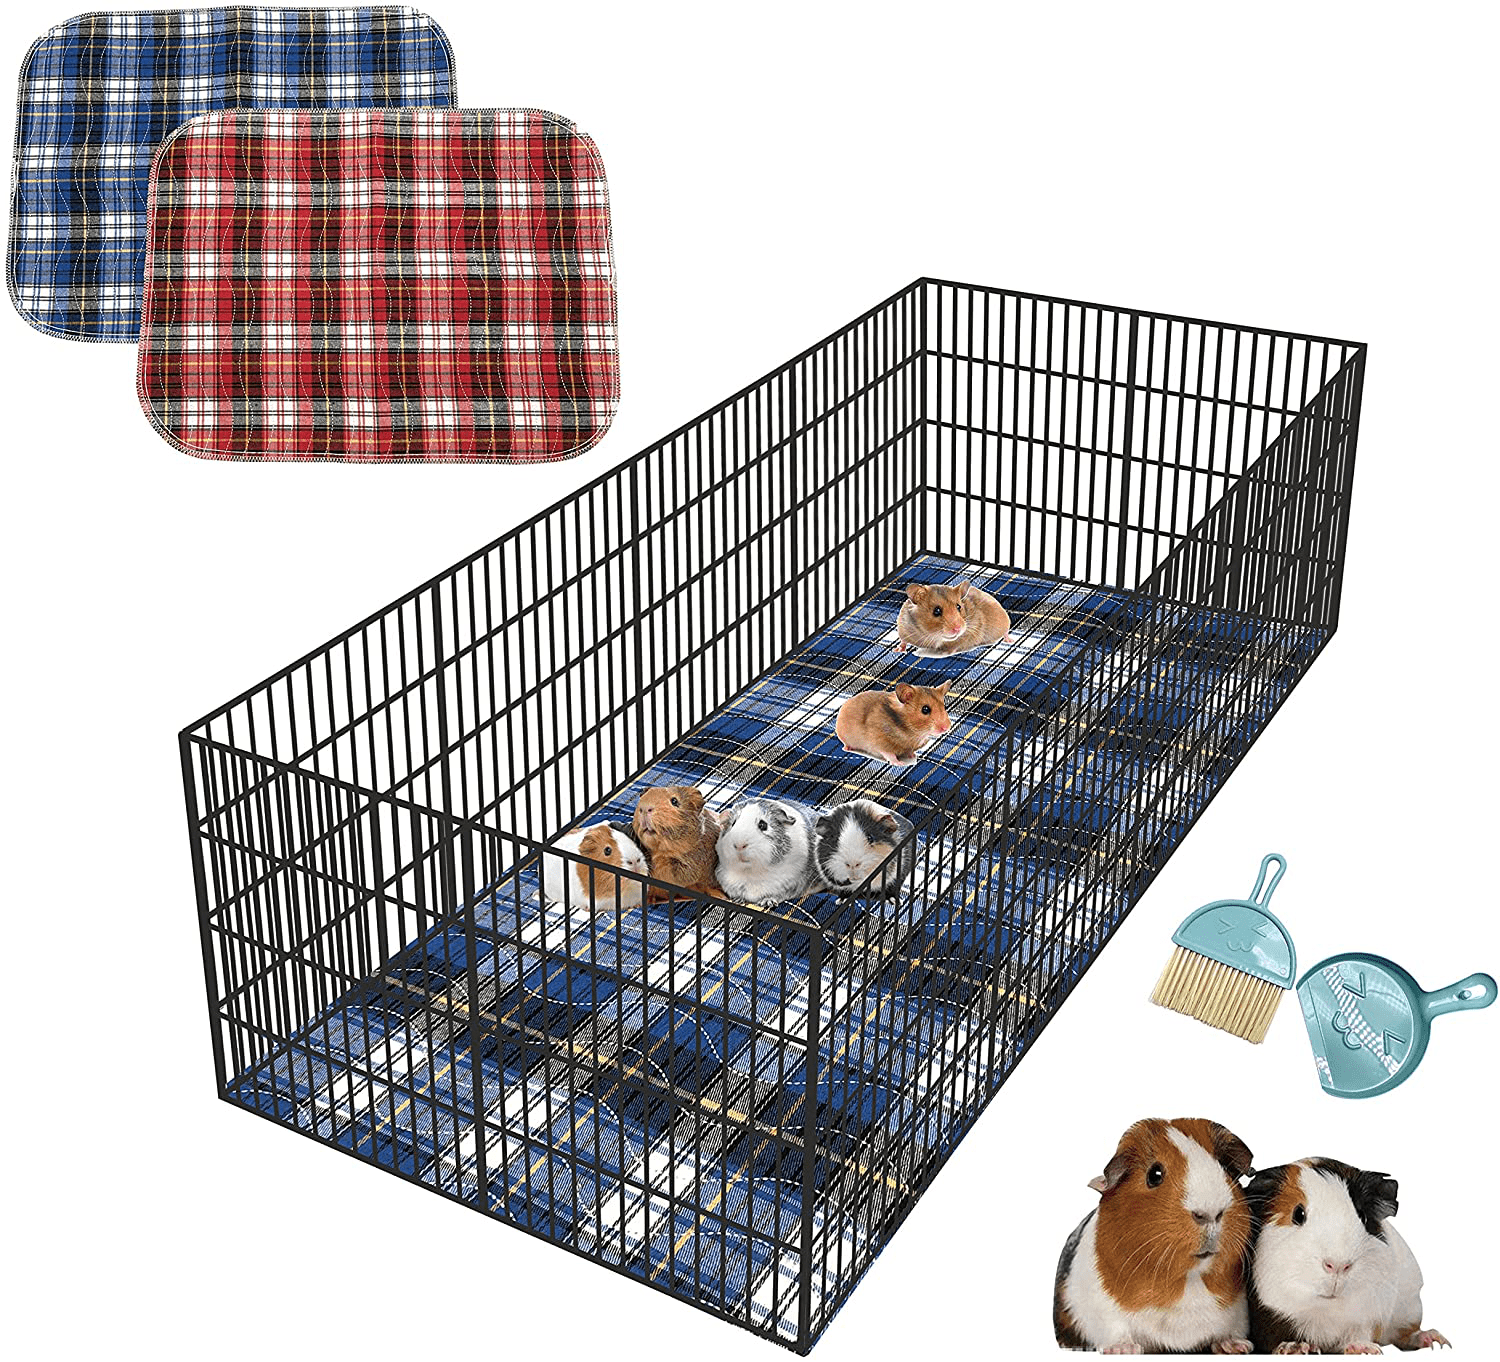 2Pk Guinea Pig Cage Liners Durable anti Slip Pads for Hamster,Rabbit,Puppy,Rat Cages,Washable Hamster Cage Bedding,Gunia Pig Bedding,All Small Animal Bedding,Midwest Guinea Pig Habitat